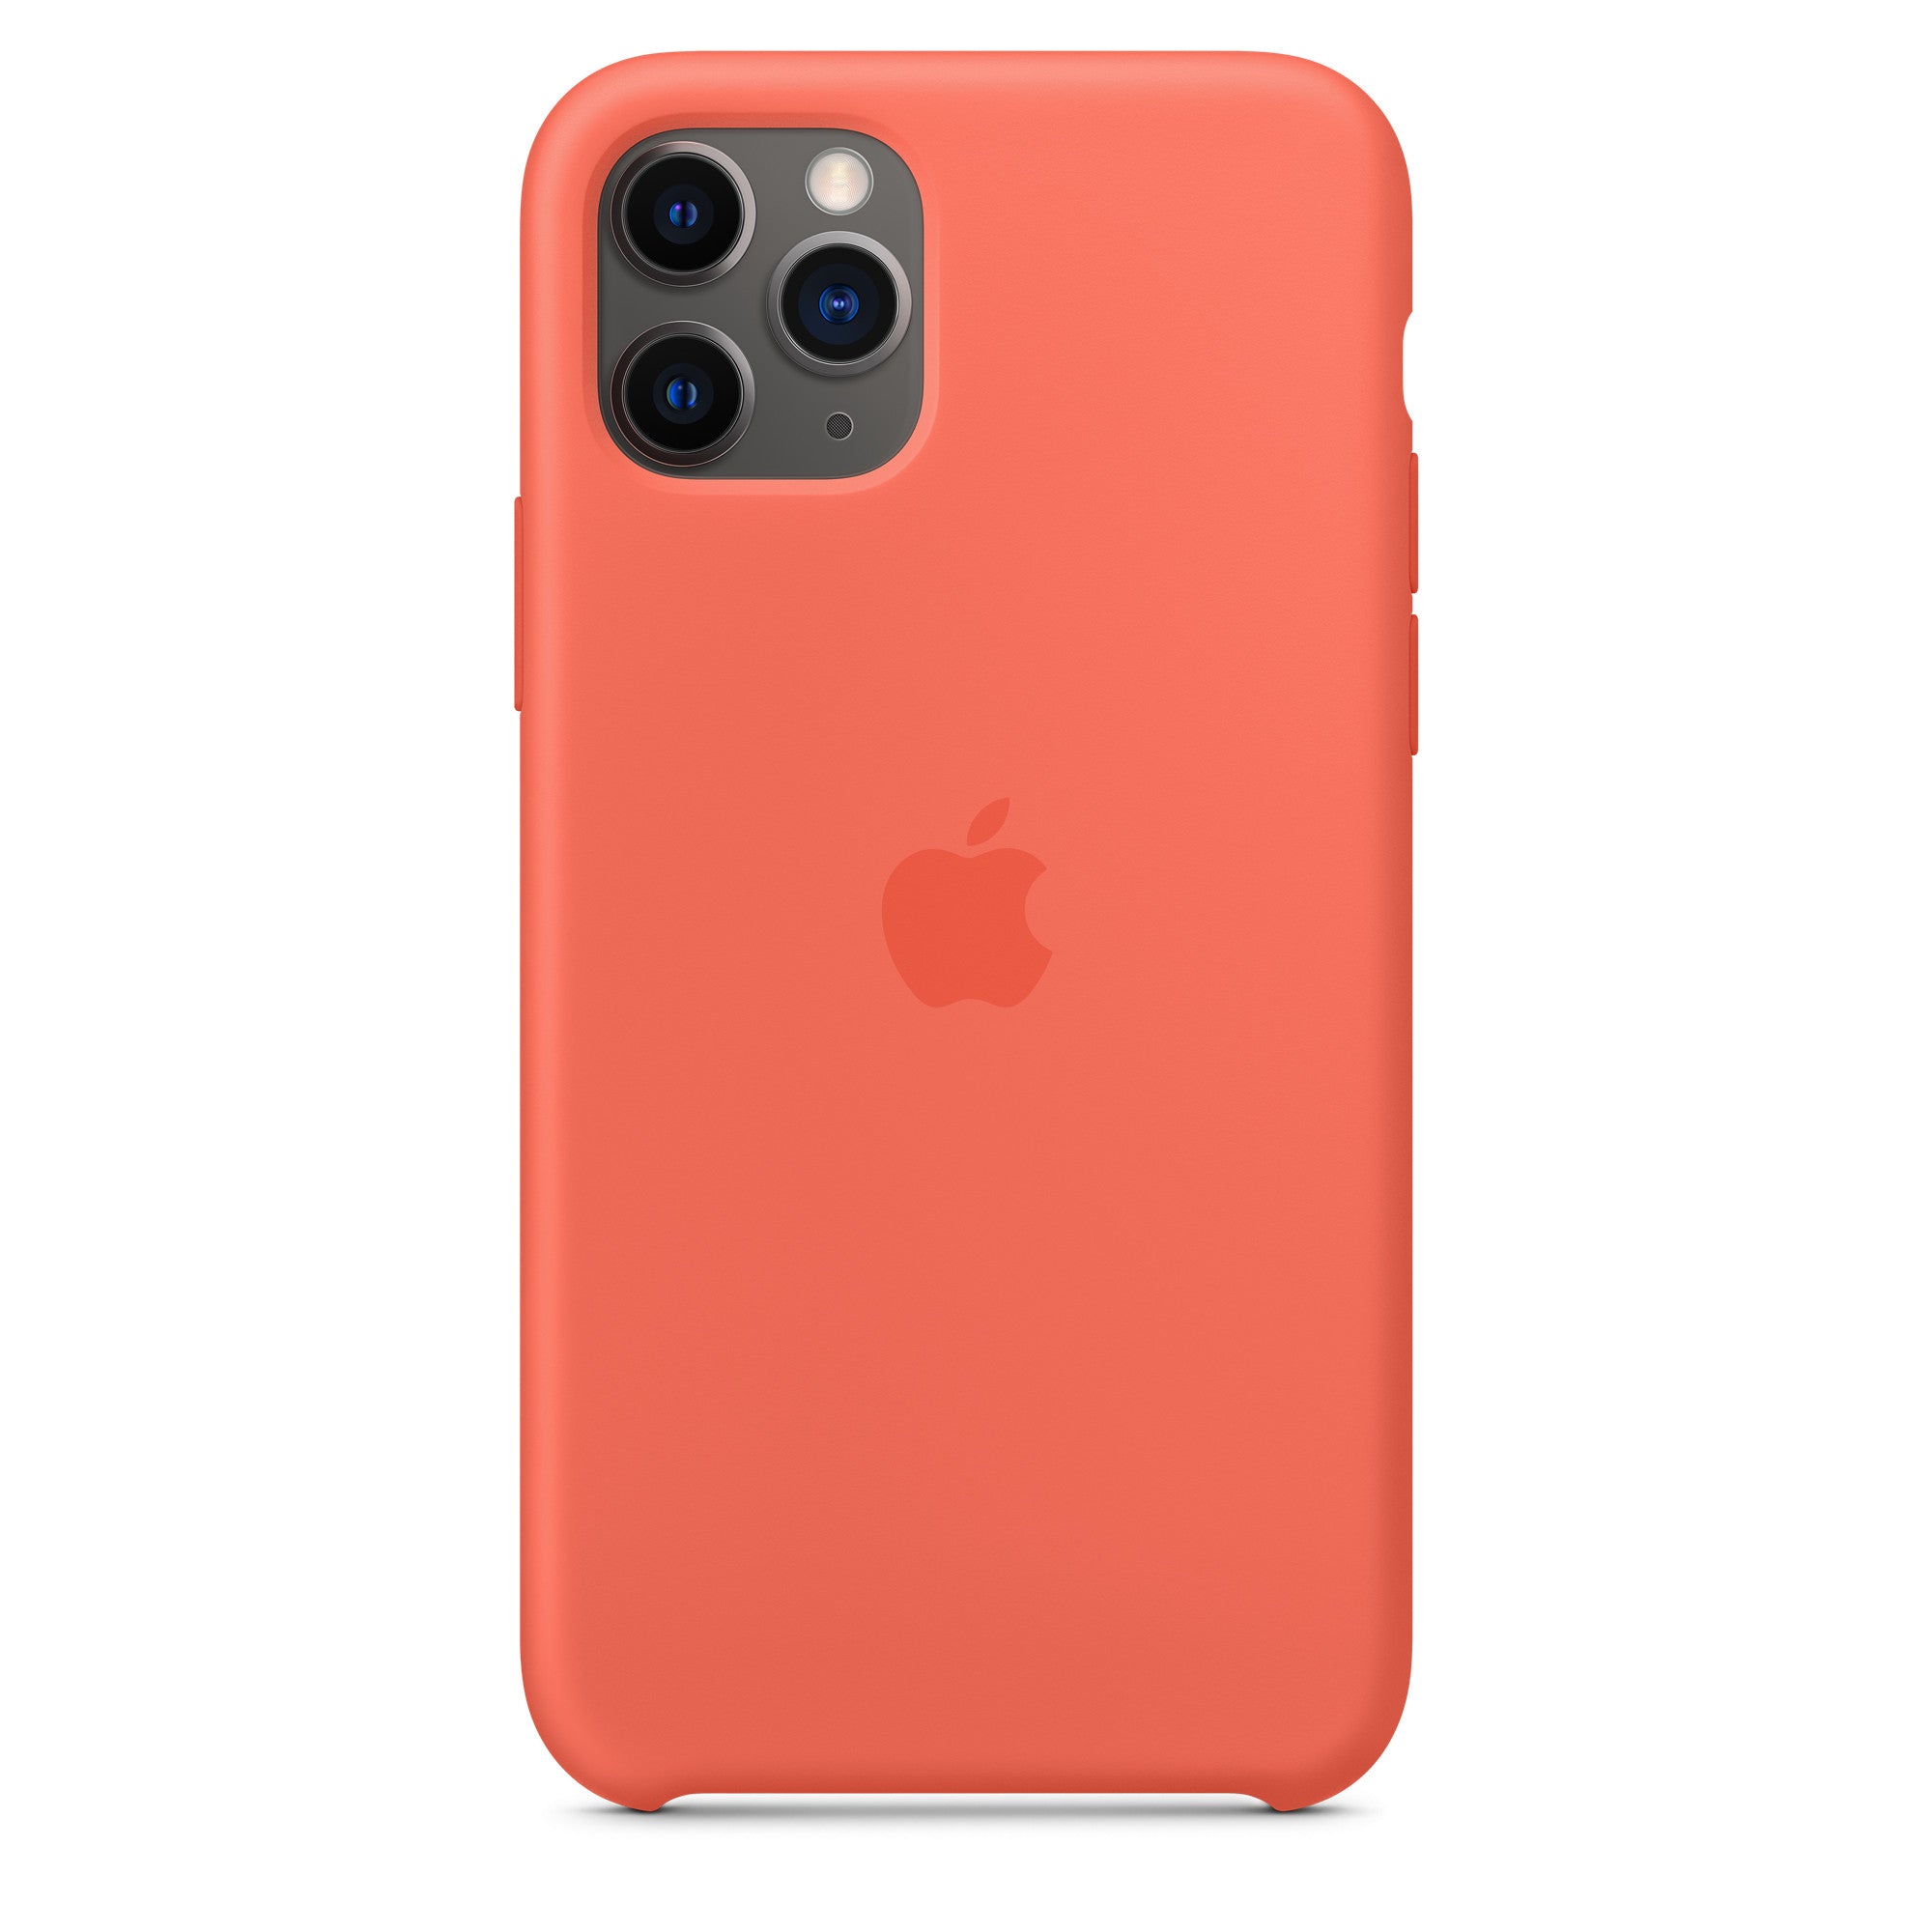 Apple iPhone 11 Pro Silicone Case Clementine Clementine New - Sealed